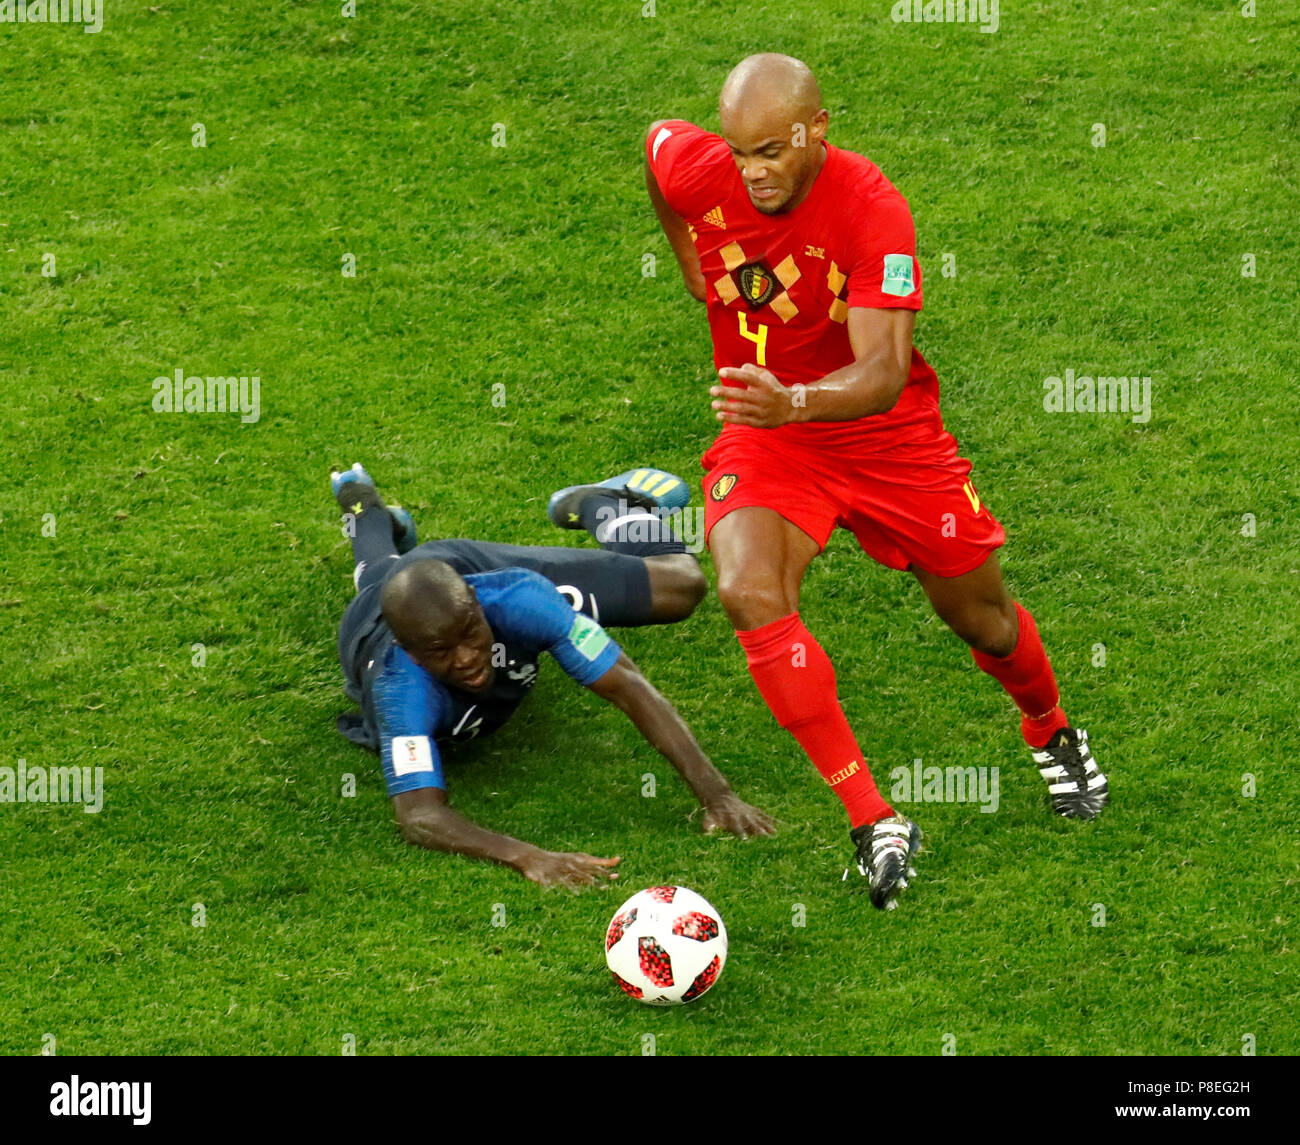 SAINT PETERSBURG, RUSSIA - JULY 10: Ngolo Kante (L) of France national team and Vincent Kompany of Belgium national team vie for the ball during the 2018 FIFA World Cup Russia Semi Final match between France and Belgium at Saint Petersburg Stadium on July 10, 2018 in Saint Petersburg, Russia. MB Media Stock Photo